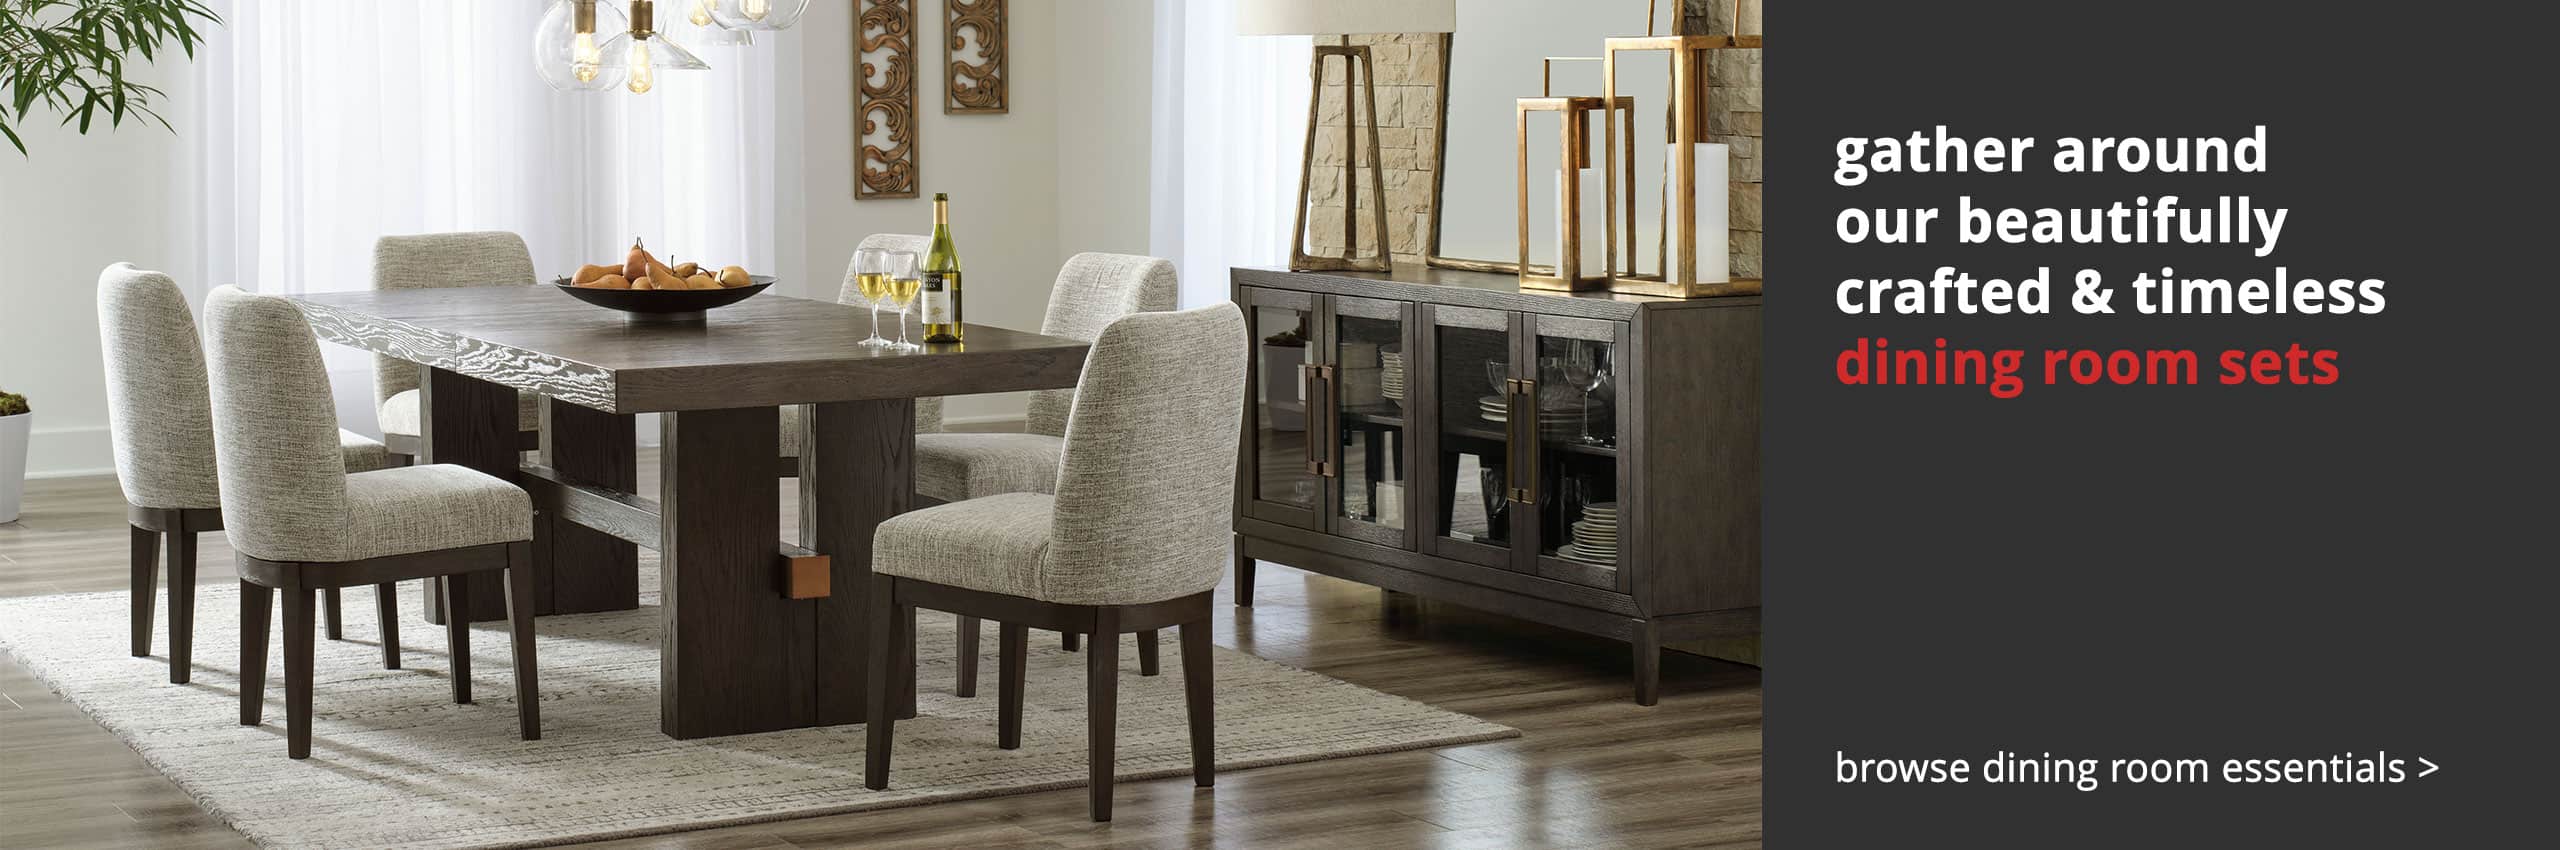 gather around our beautifully crafted & timeless dining room sets – browse dining room essentials